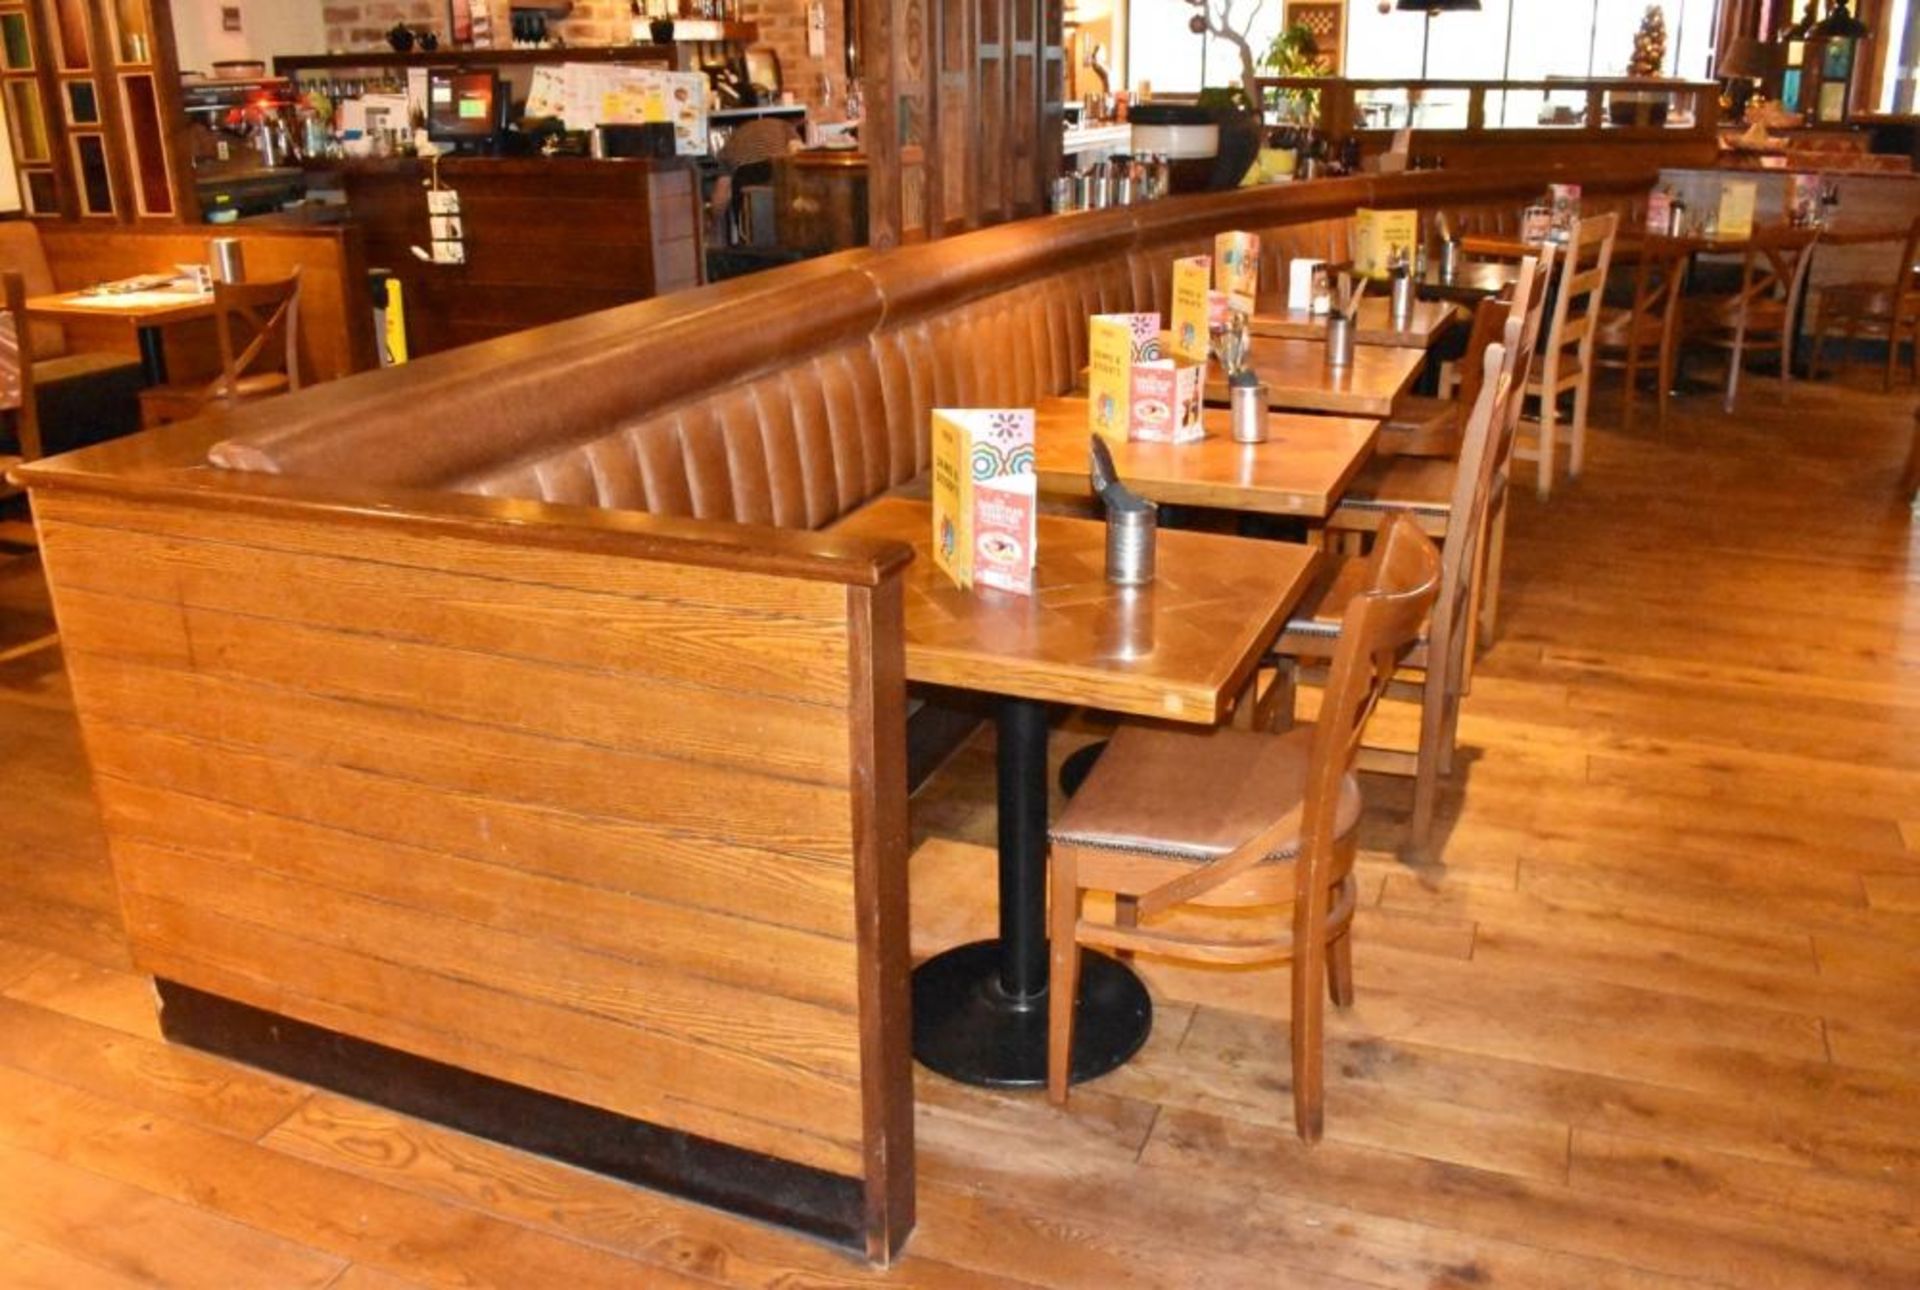 1 x Long Curved Seating Bench From Mexican Themed Restaurant - CL461 - Ref PR891 - Location: London